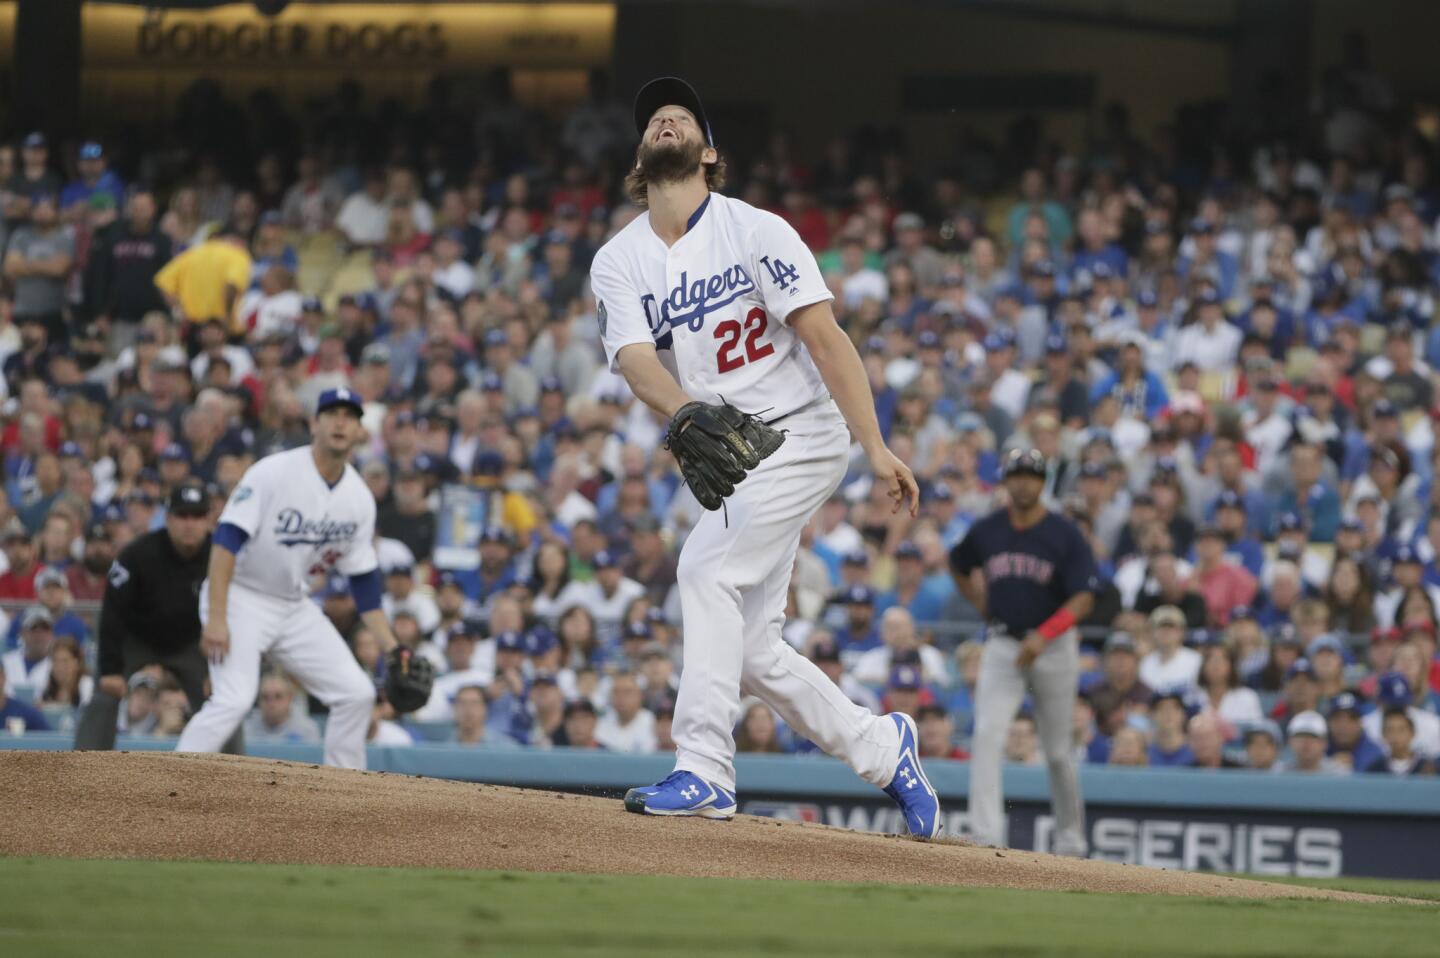 Dodger pitcher Clayton Kershaw follows the flight of the ball on Steve Pearce’s first inning two run homer.